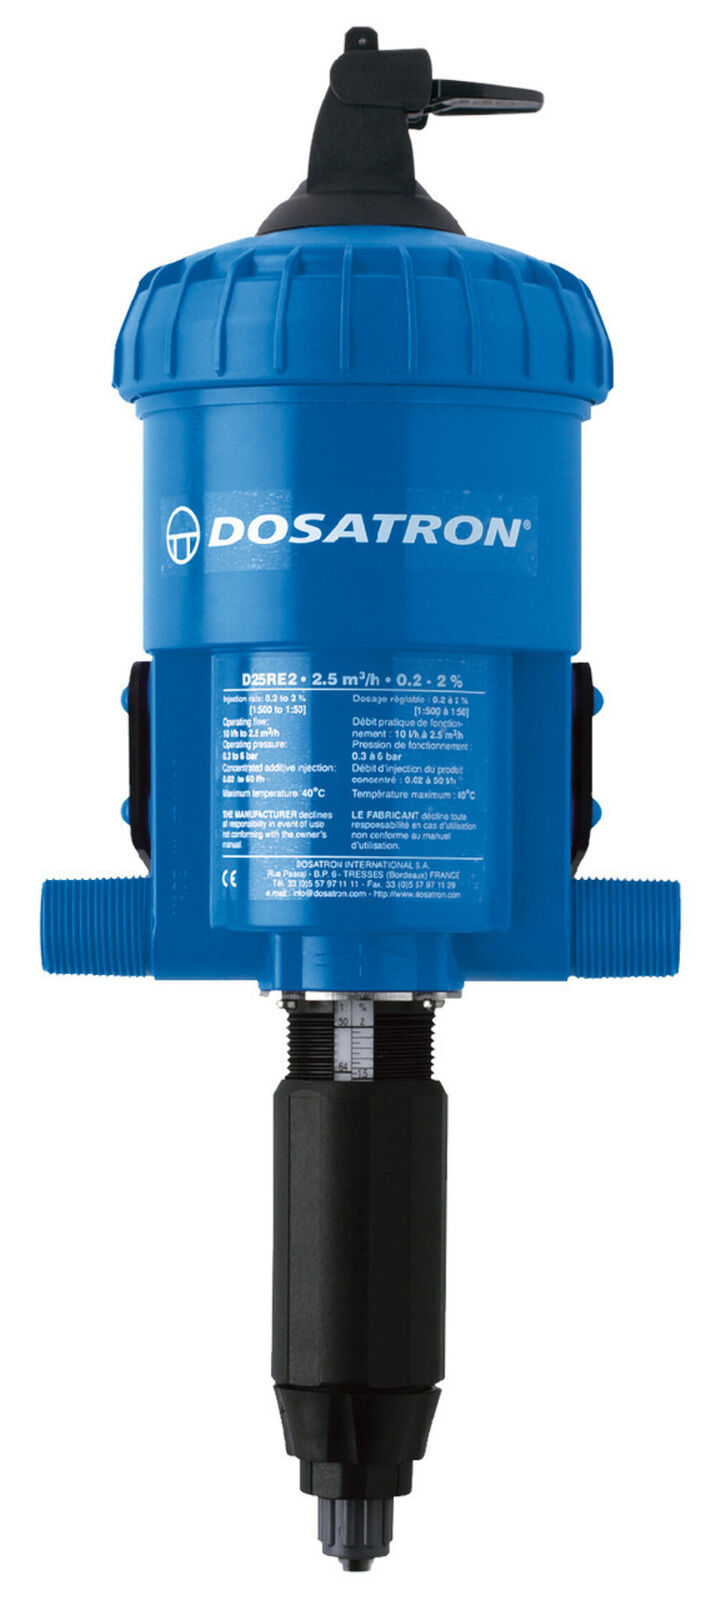 Dosatron Water Powered Doser 11 GPM 1:500 to 1:50 - 3/4 in (D25RE2VFBPHY)